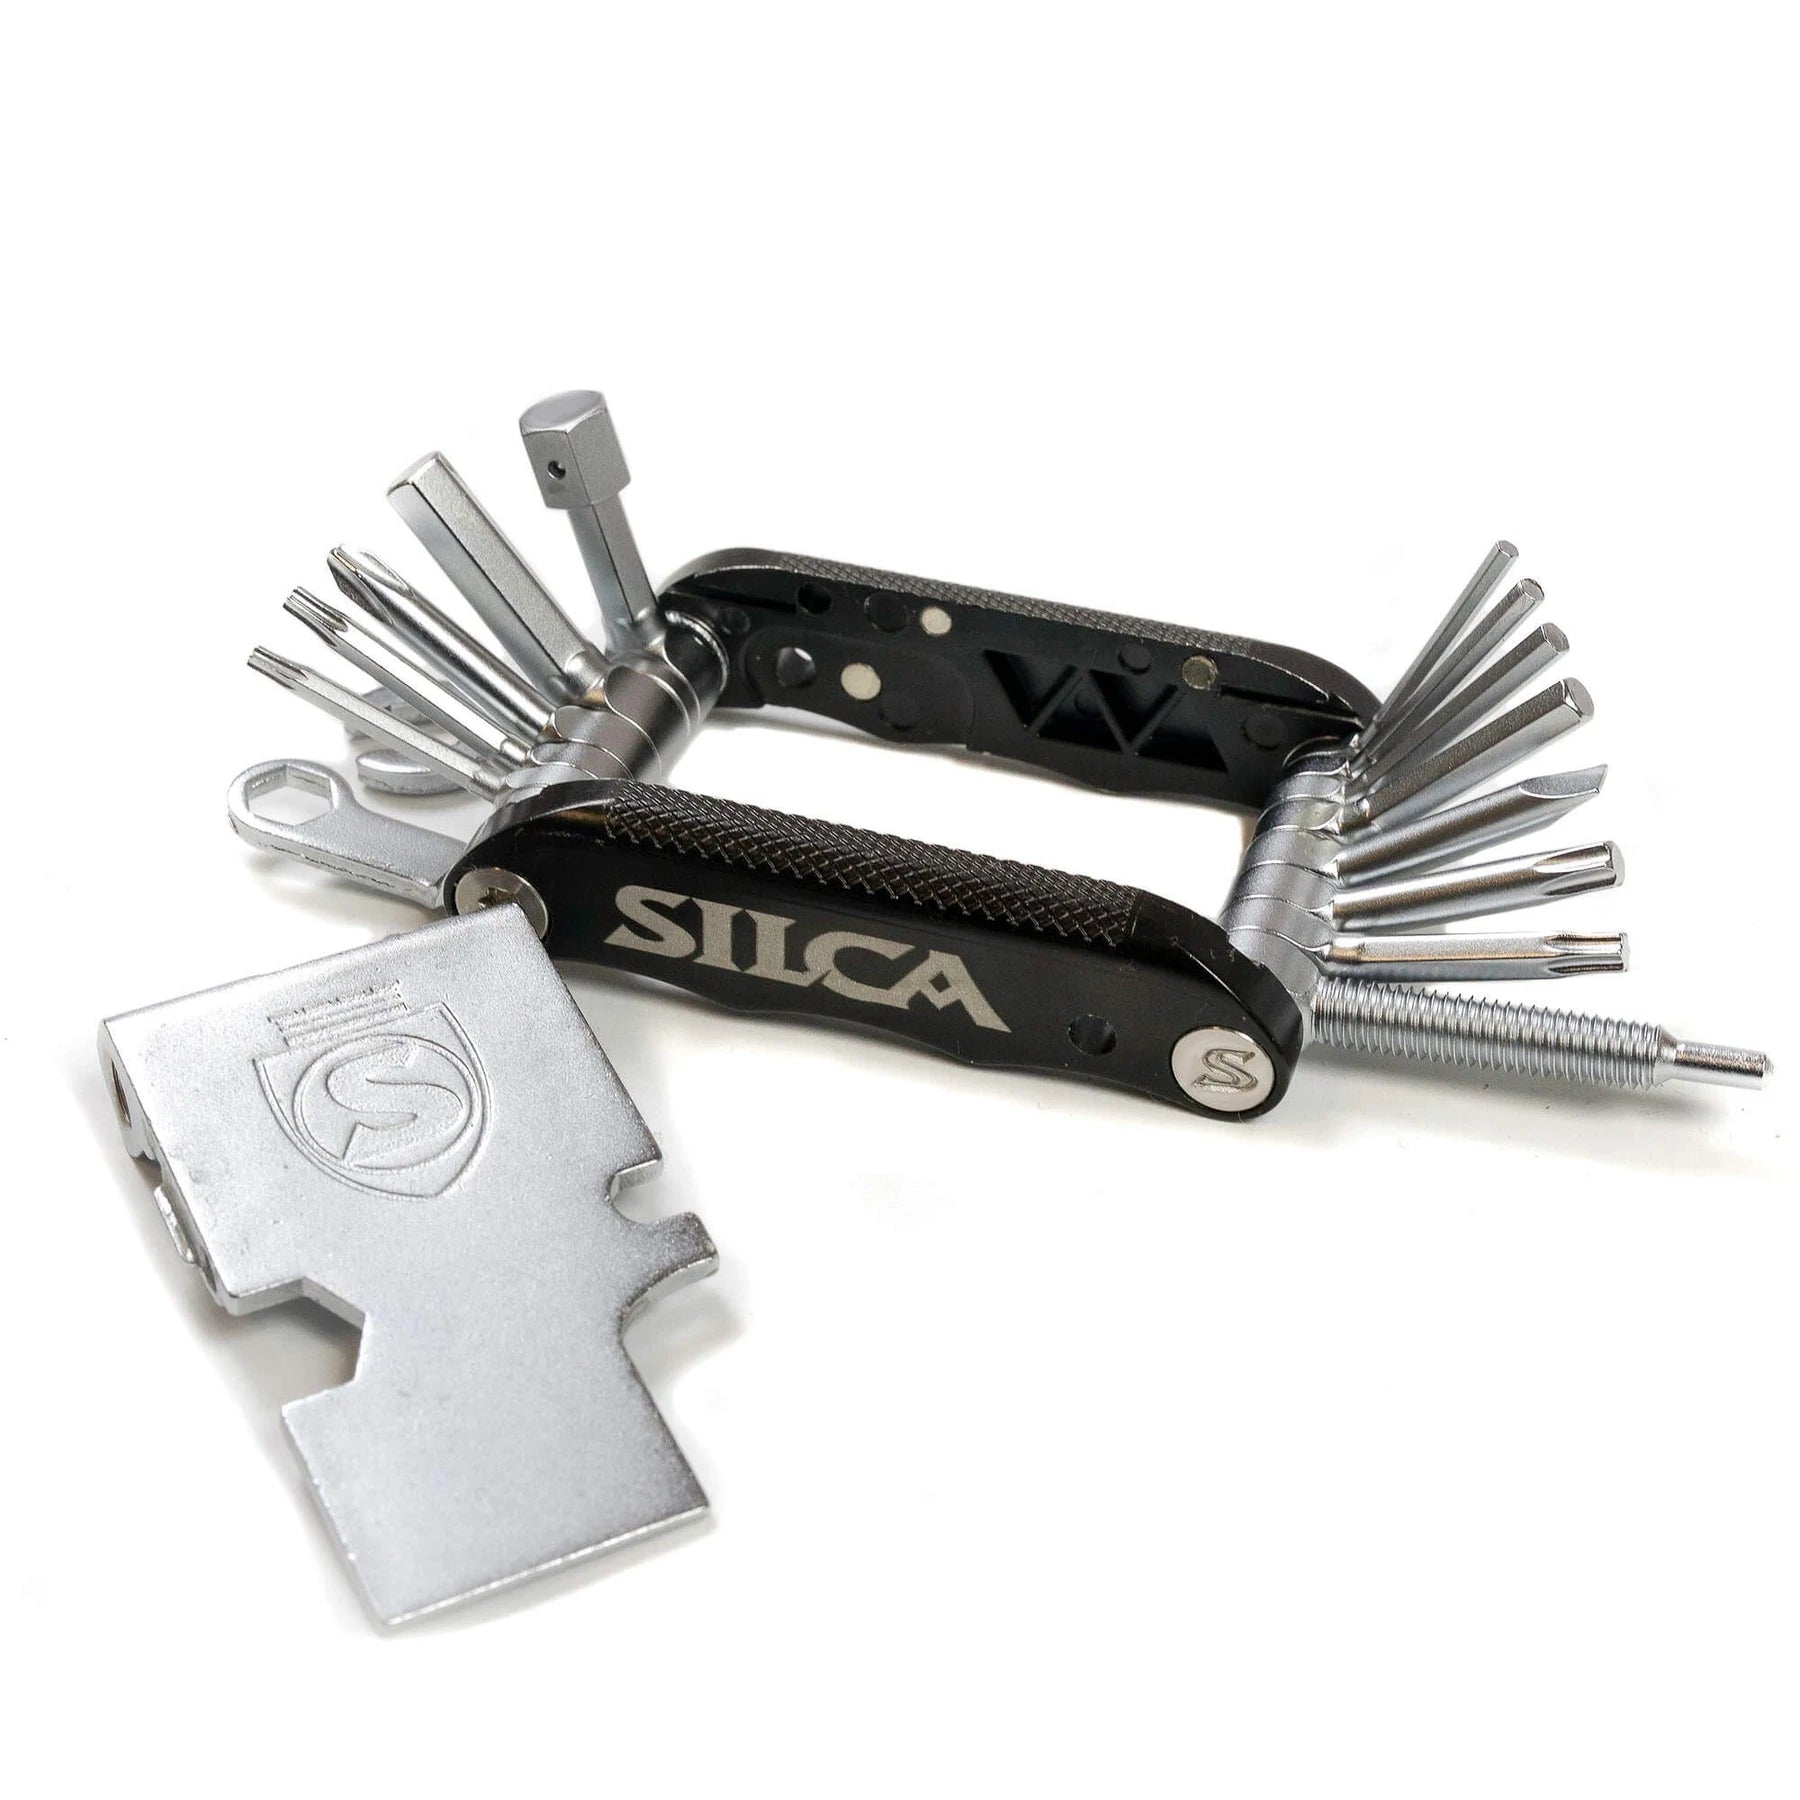 Silca Venti 20 Multi Tool opened up on a white background